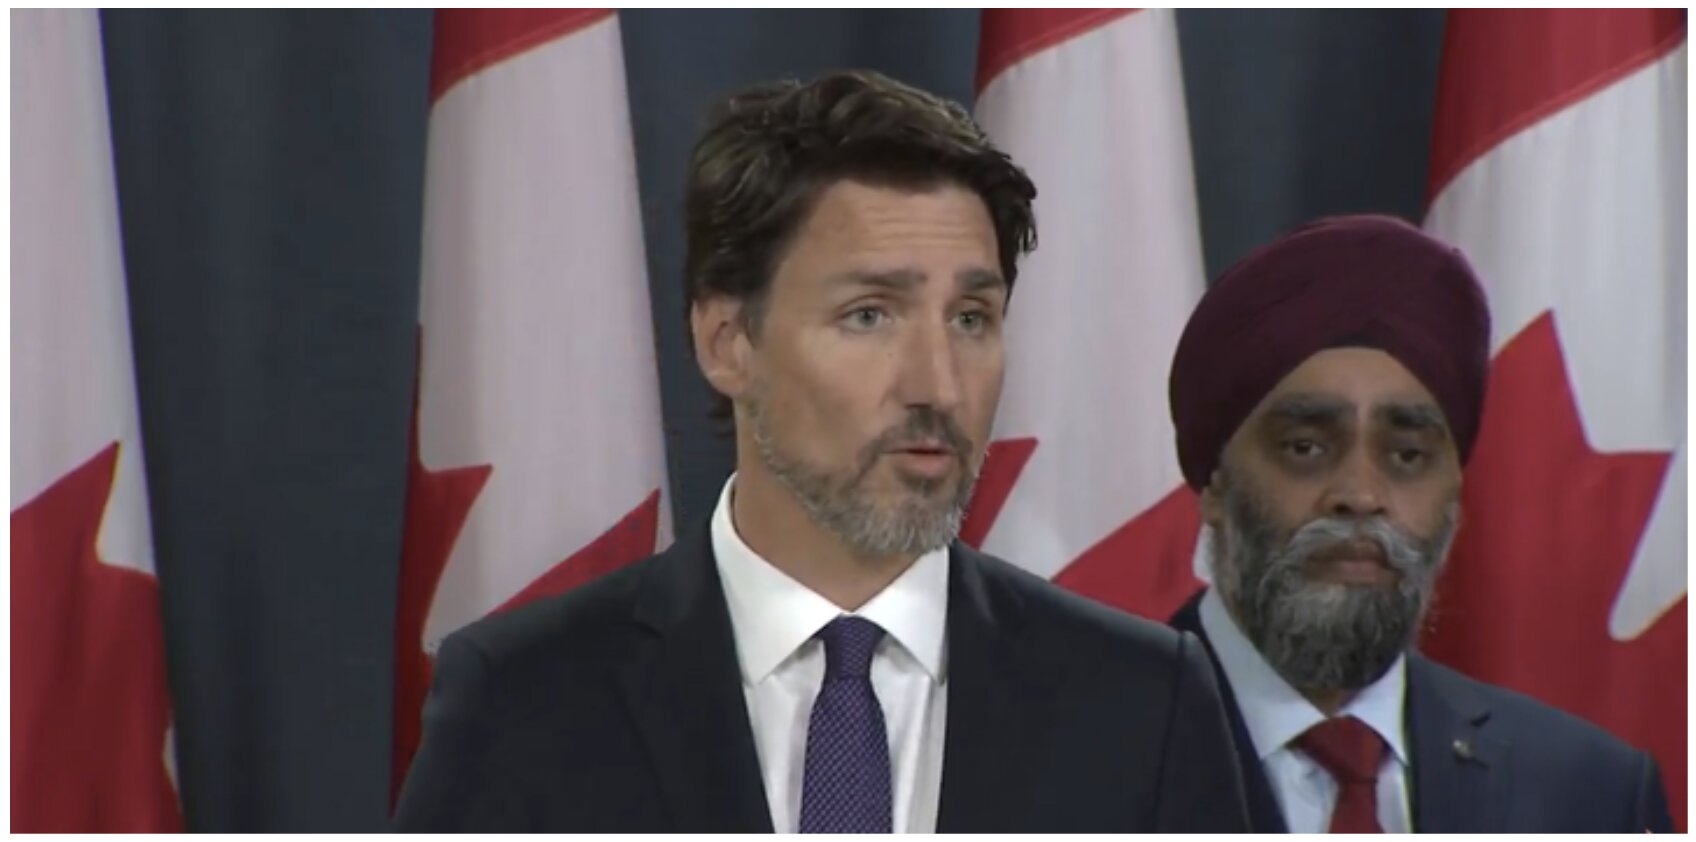 WATCH: Trudeau doesn’t rule out blaming U.S. for plane shot down by Iran